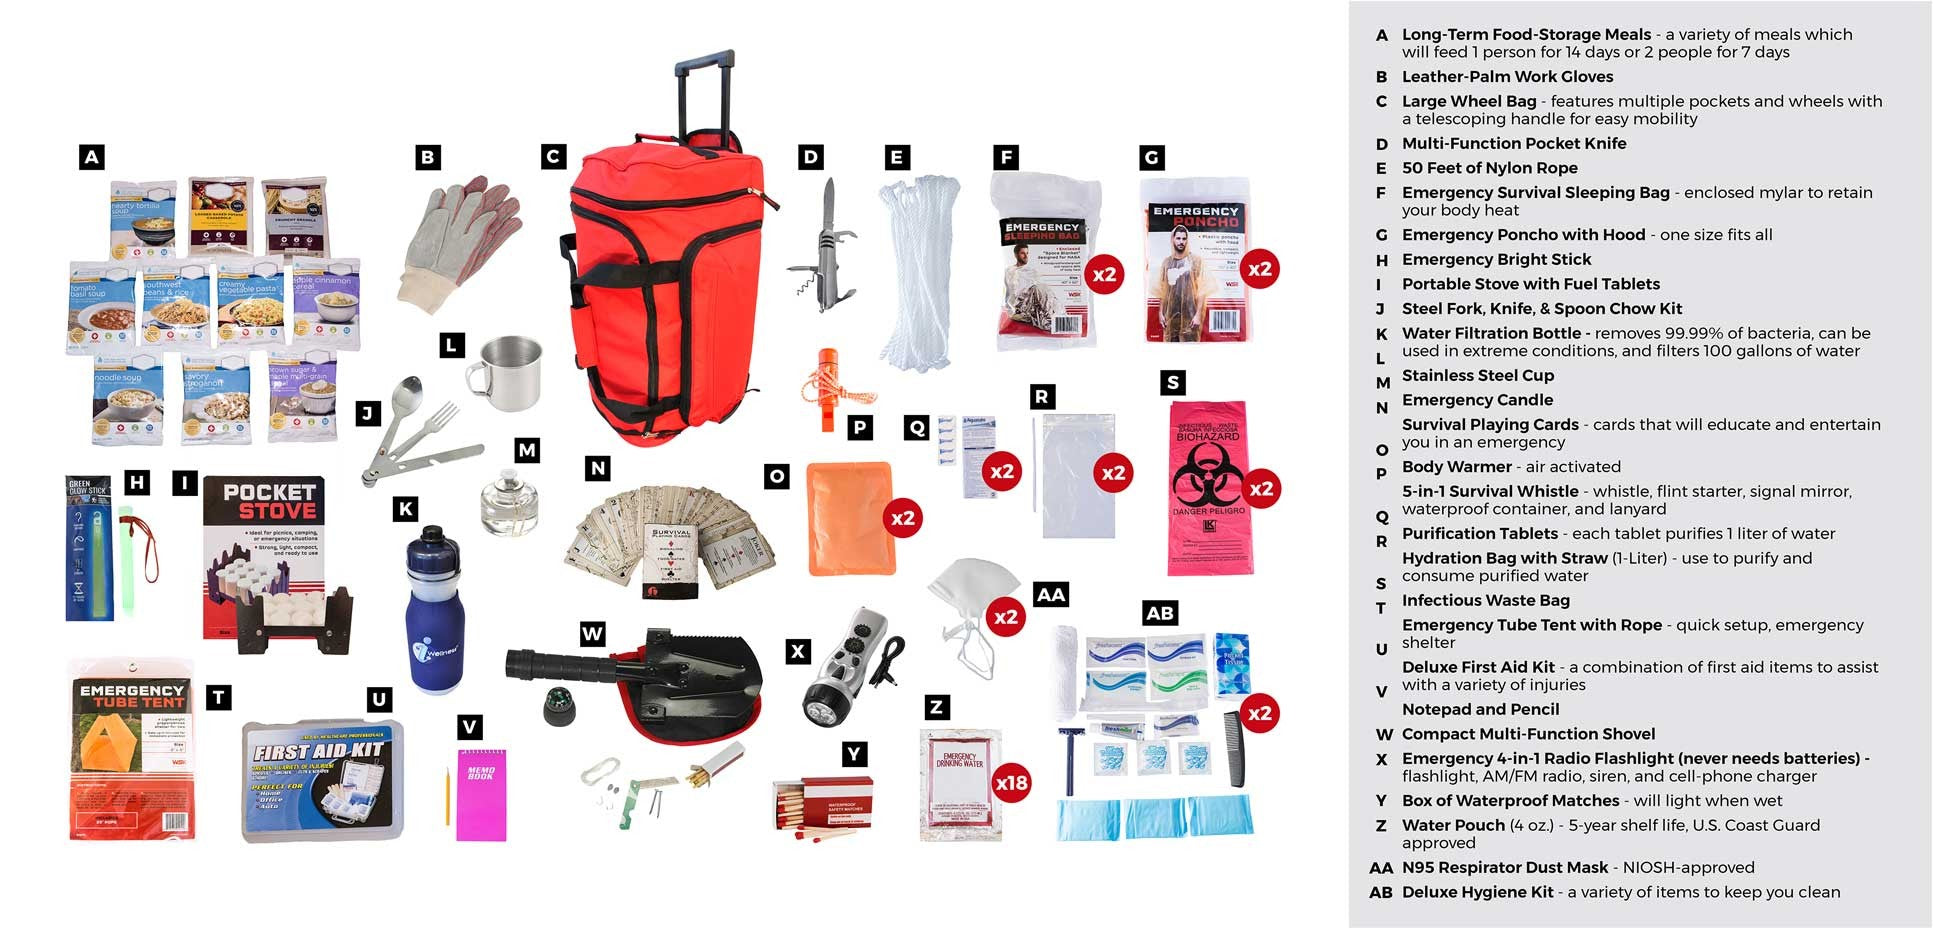 7 Day Ultimate Survival Kit With Meals - 2 Person